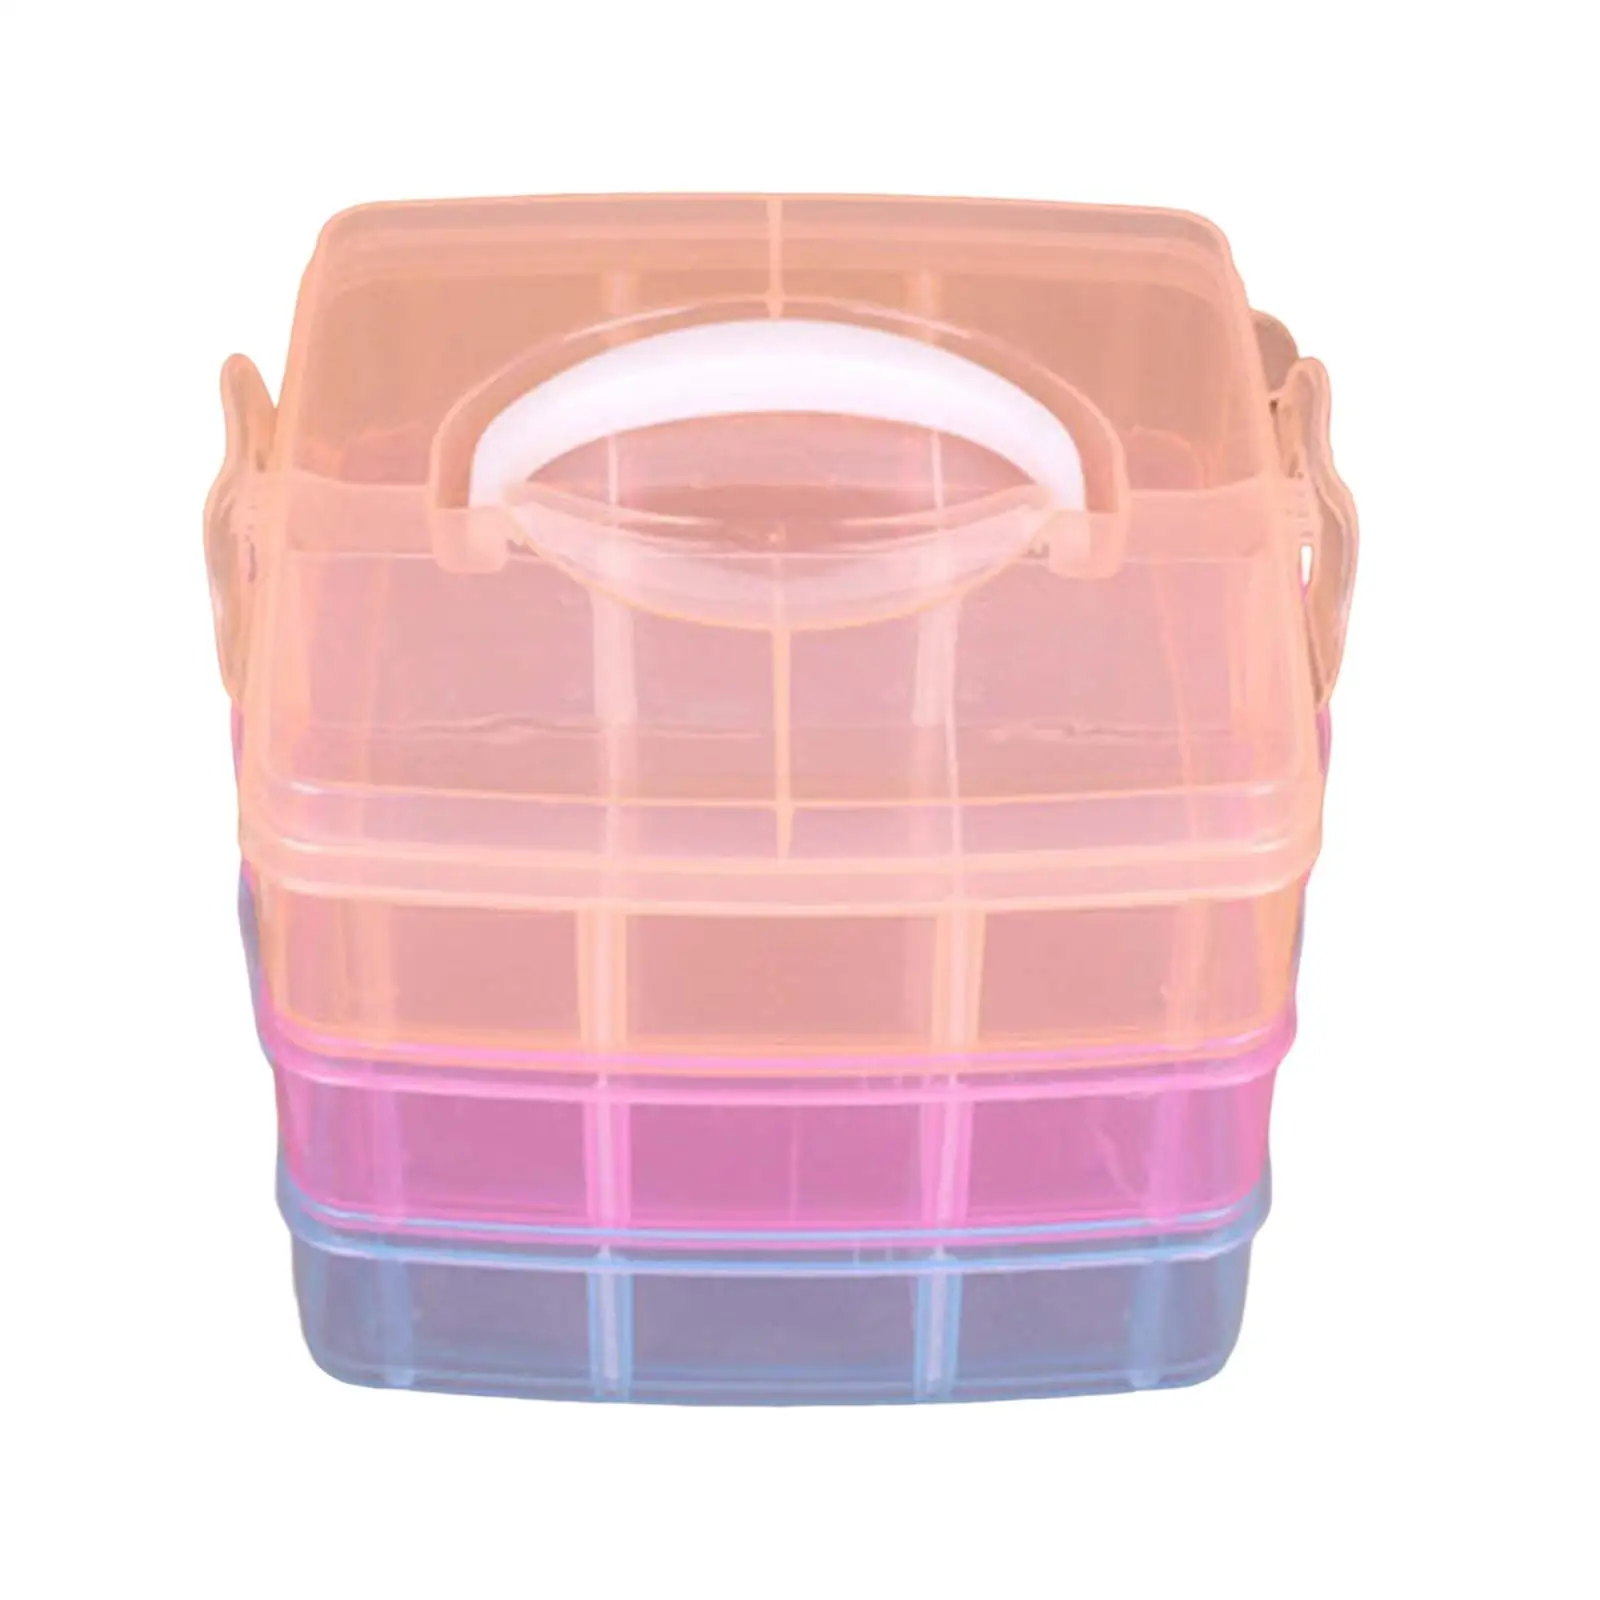 Transparent Hardware Tool Box ABS Nail Case Box Storage Organizer for Beads Fishing Hooks Display Collection